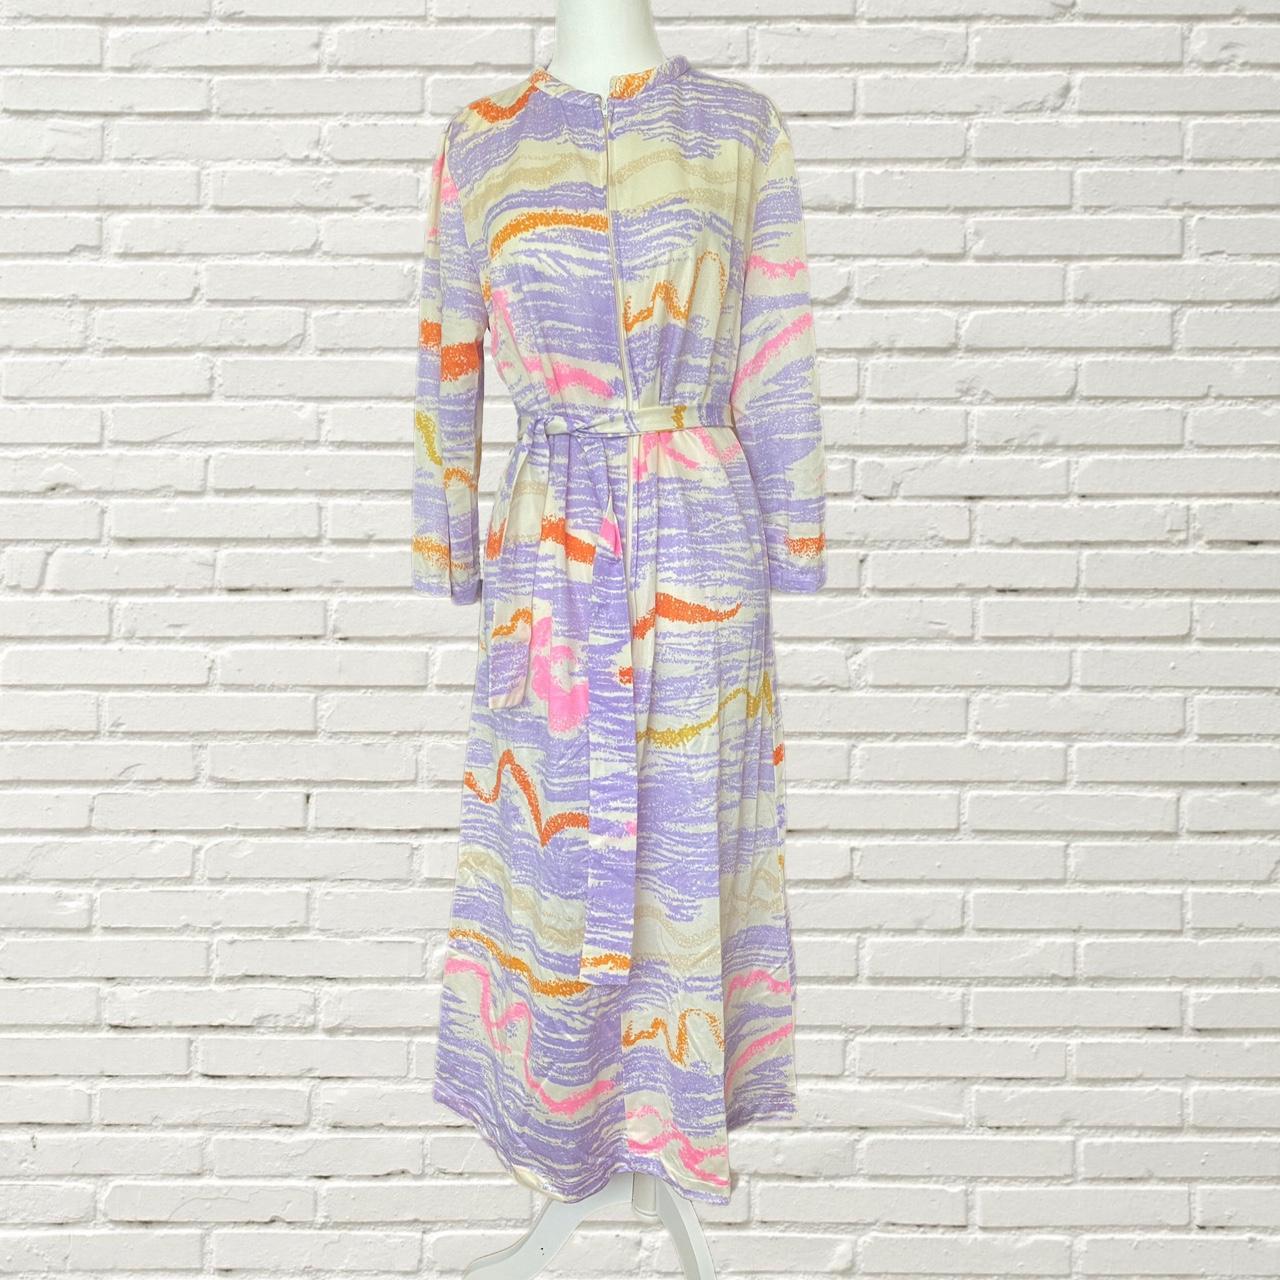 Product Image 1 - Vintage 60s 70s House Dress
funky